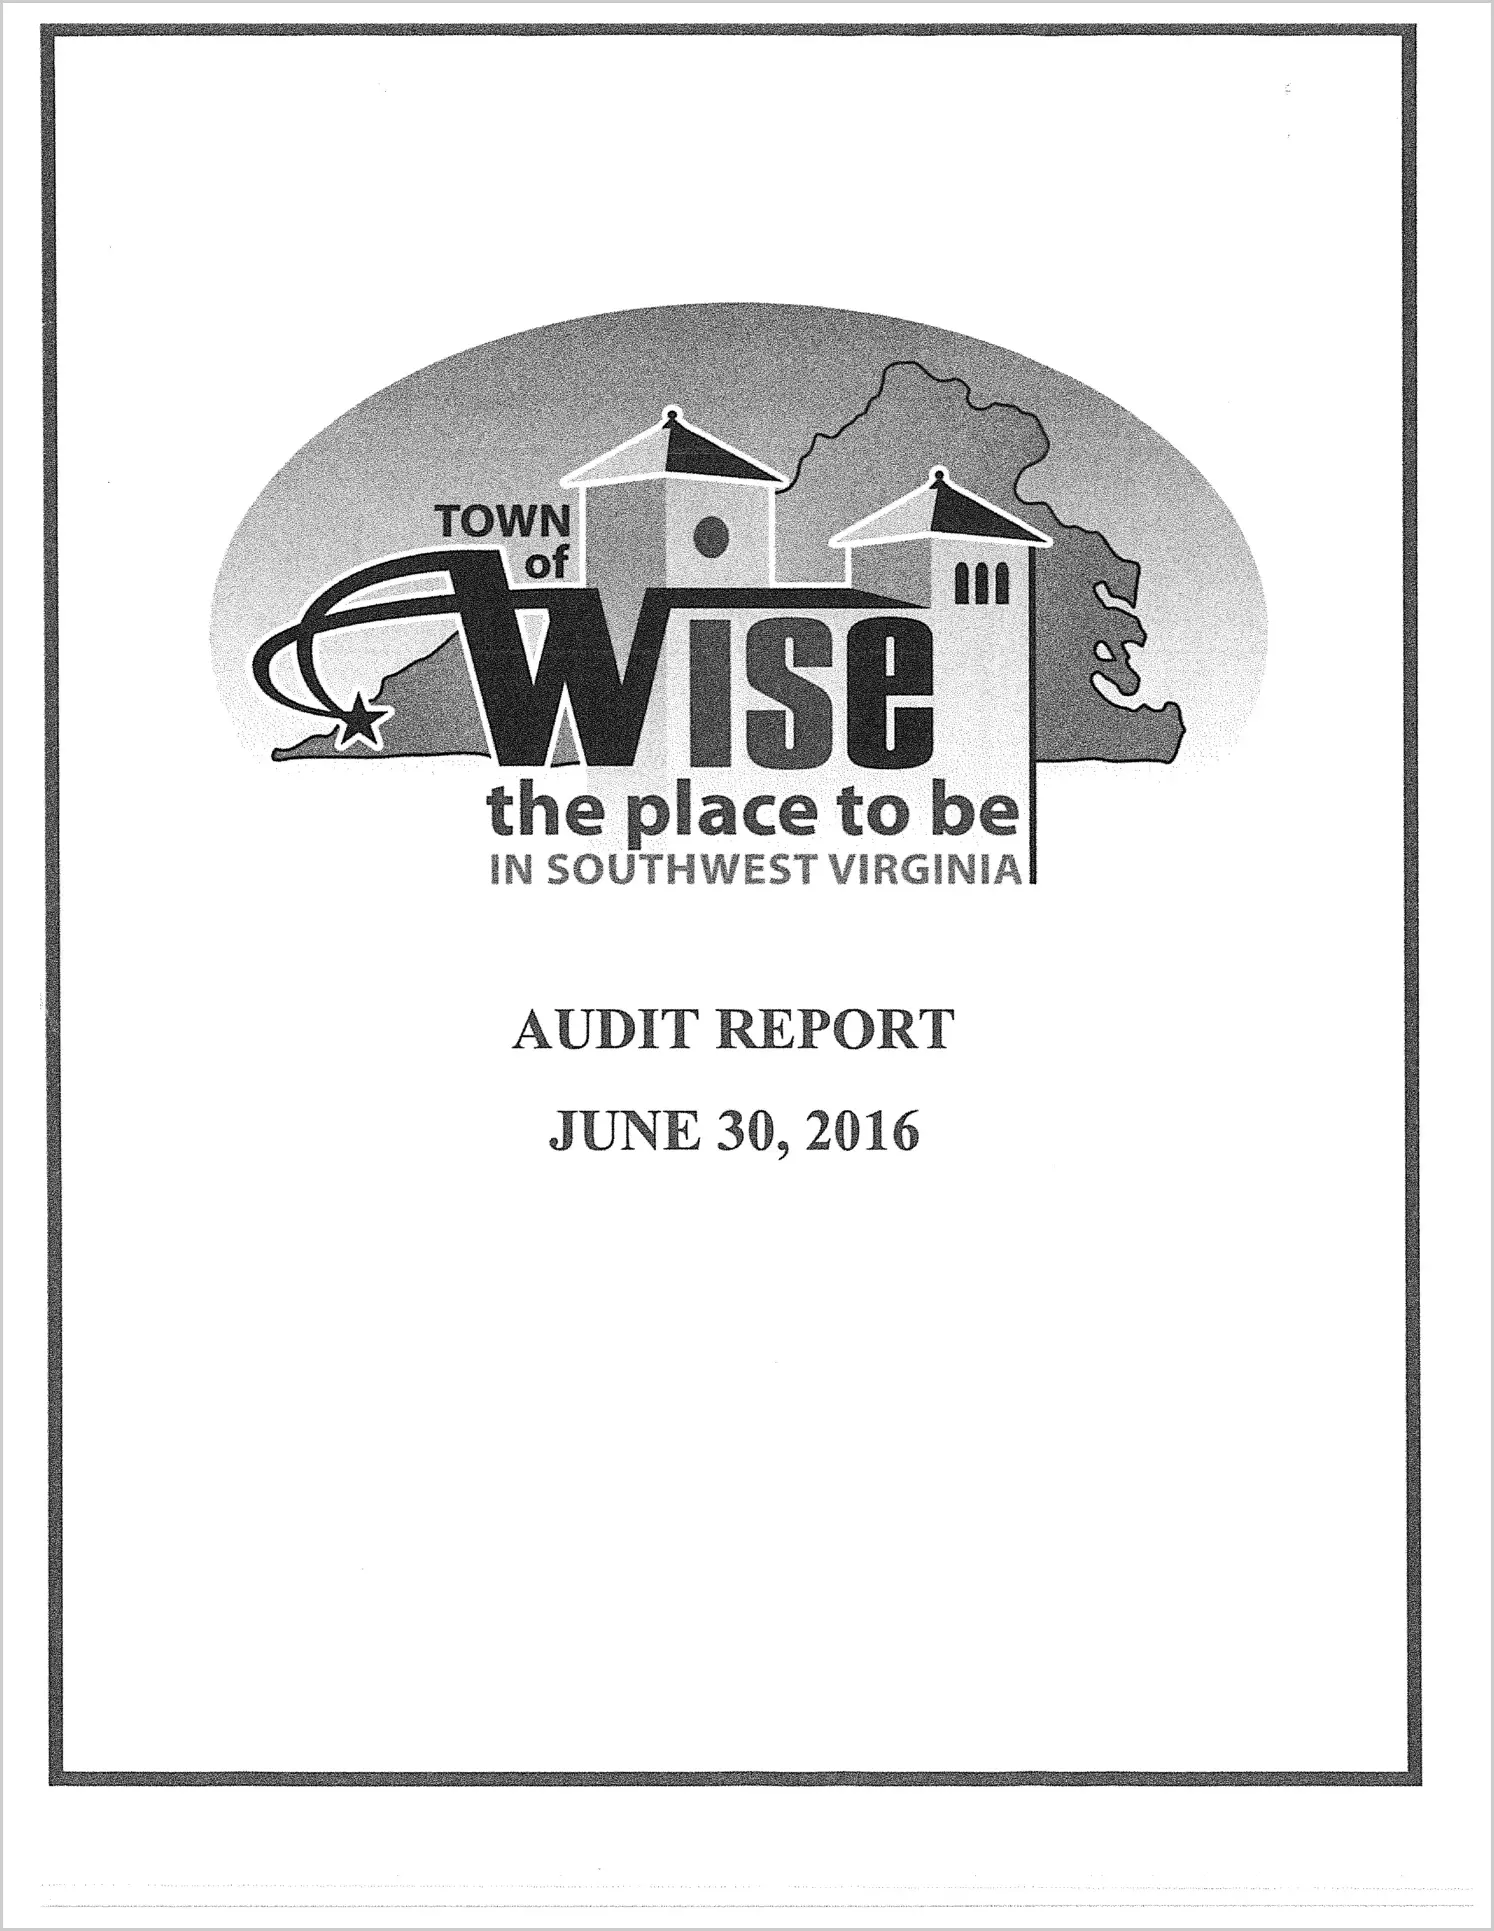 2016 Annual Financial Report for Town of Wise